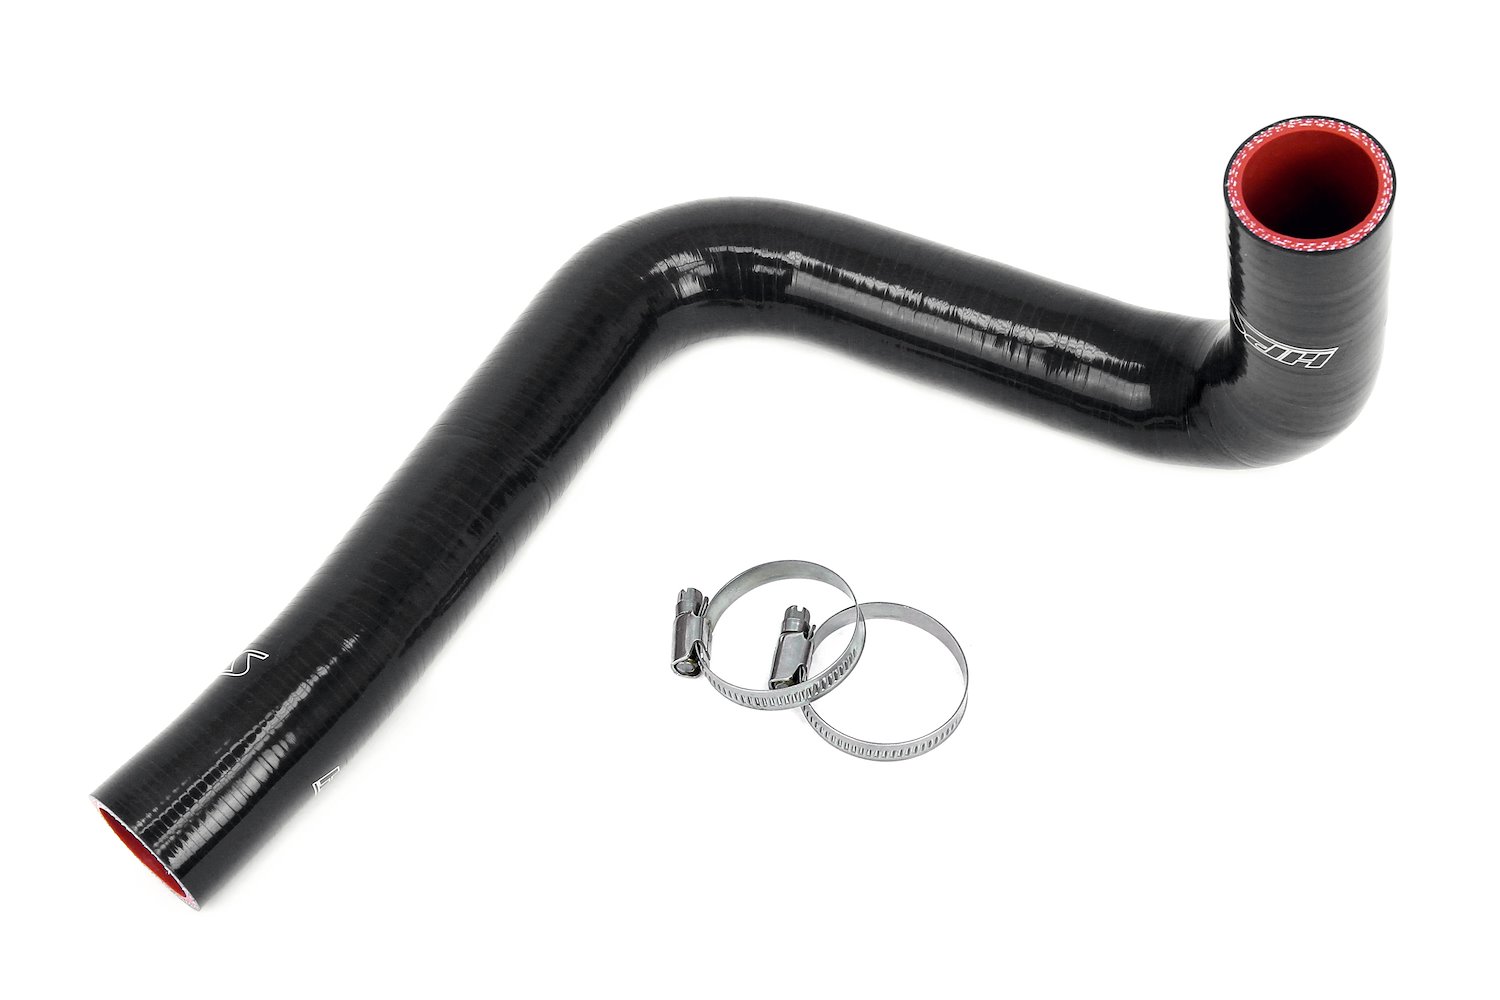 57-2047-BLK Radiator Hose Kit, 3-Ply Reinforced Silicone, Replaces Rubber Lower Radiator Coolant Hose.